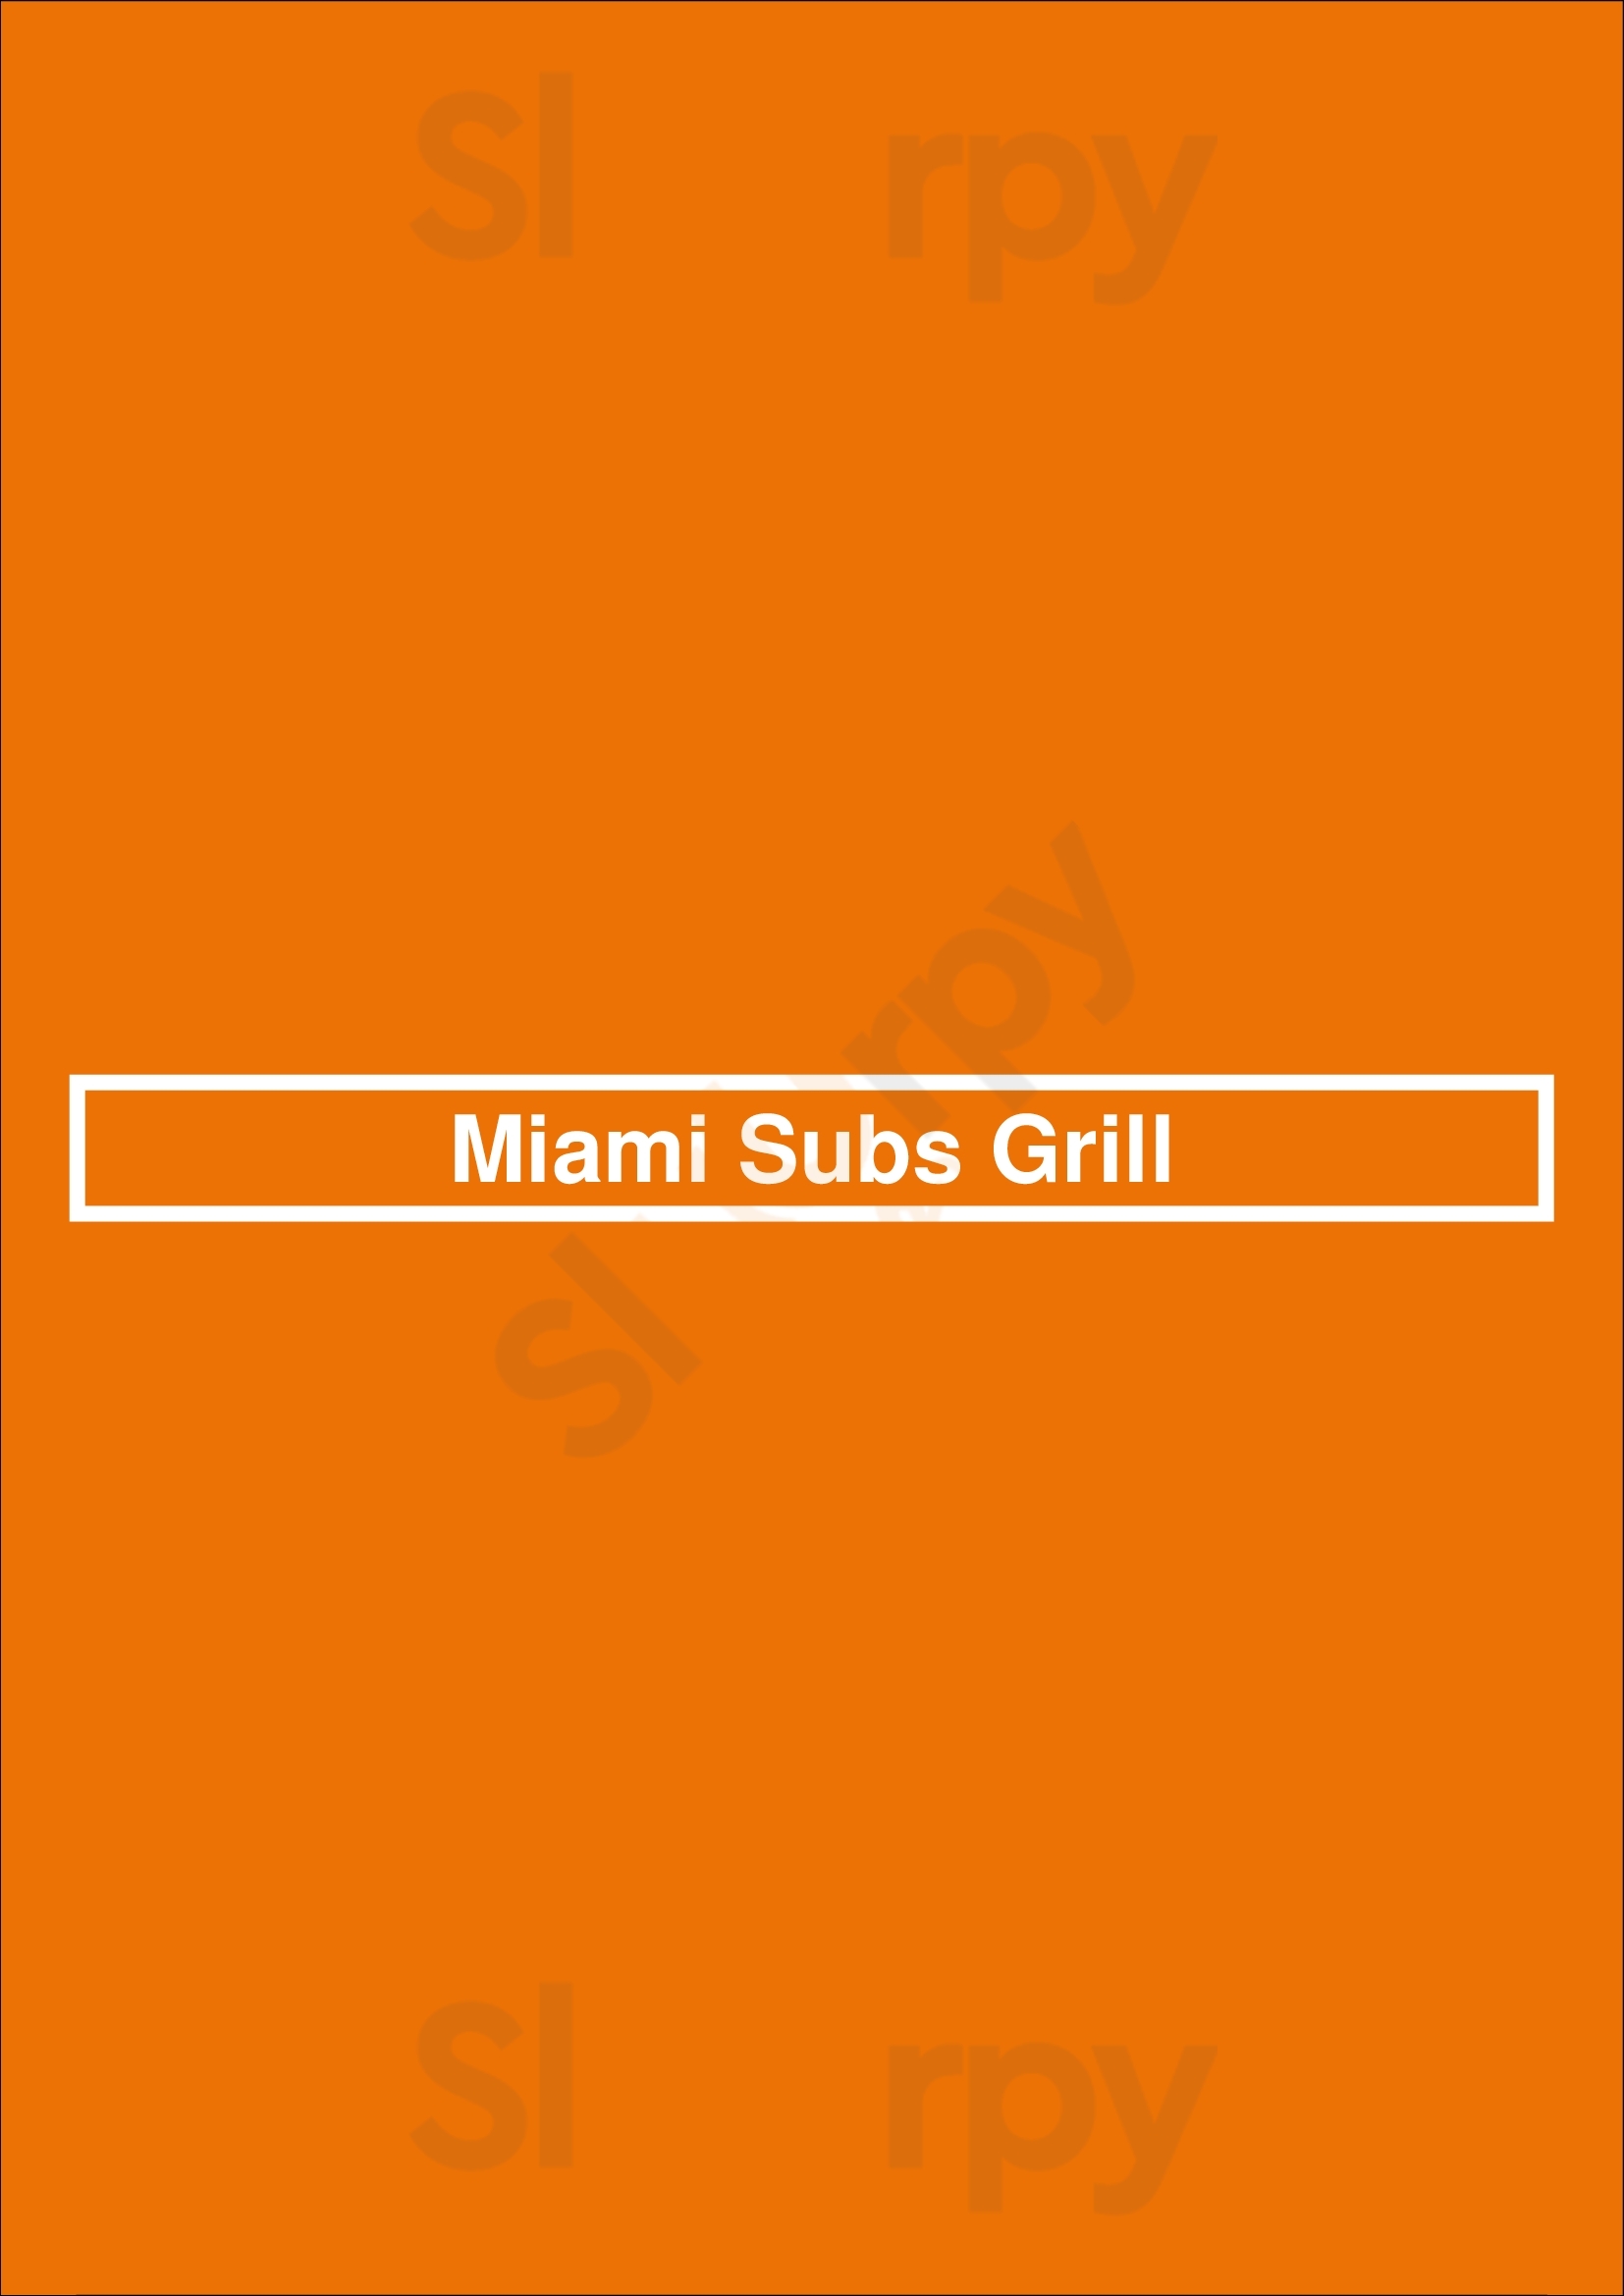 Miami Subs Grill Fort Lauderdale Menu - 1